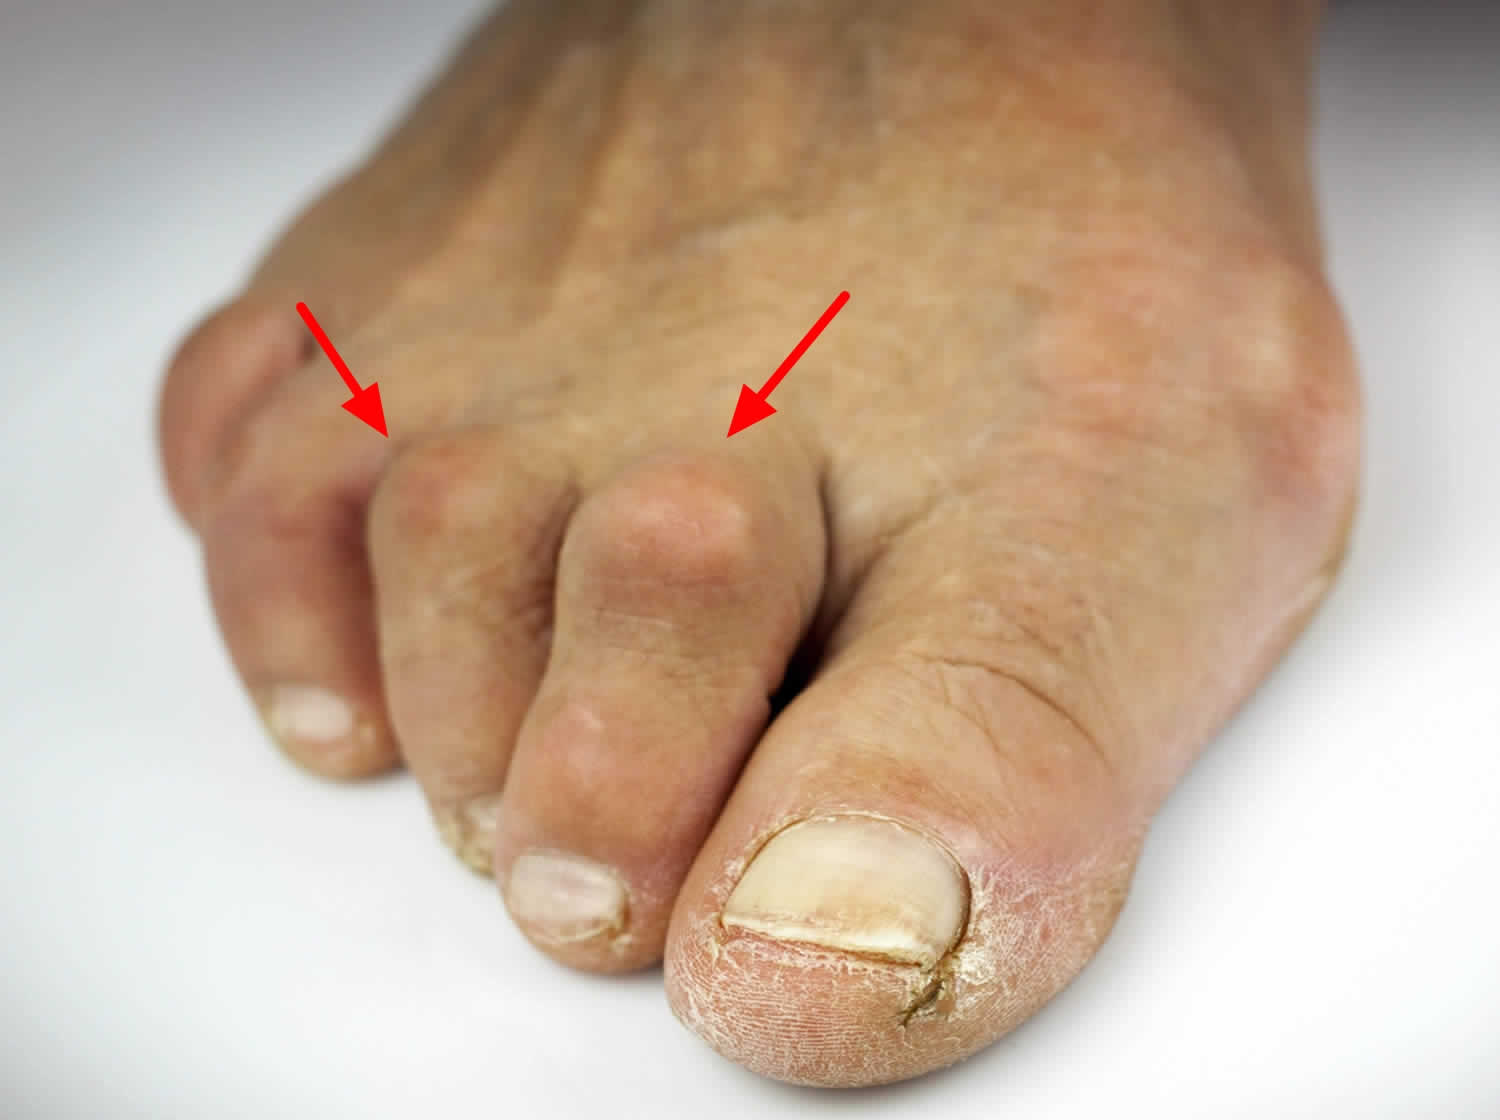 Hammer toe causes, appearance, symptoms and hammer toe treatment